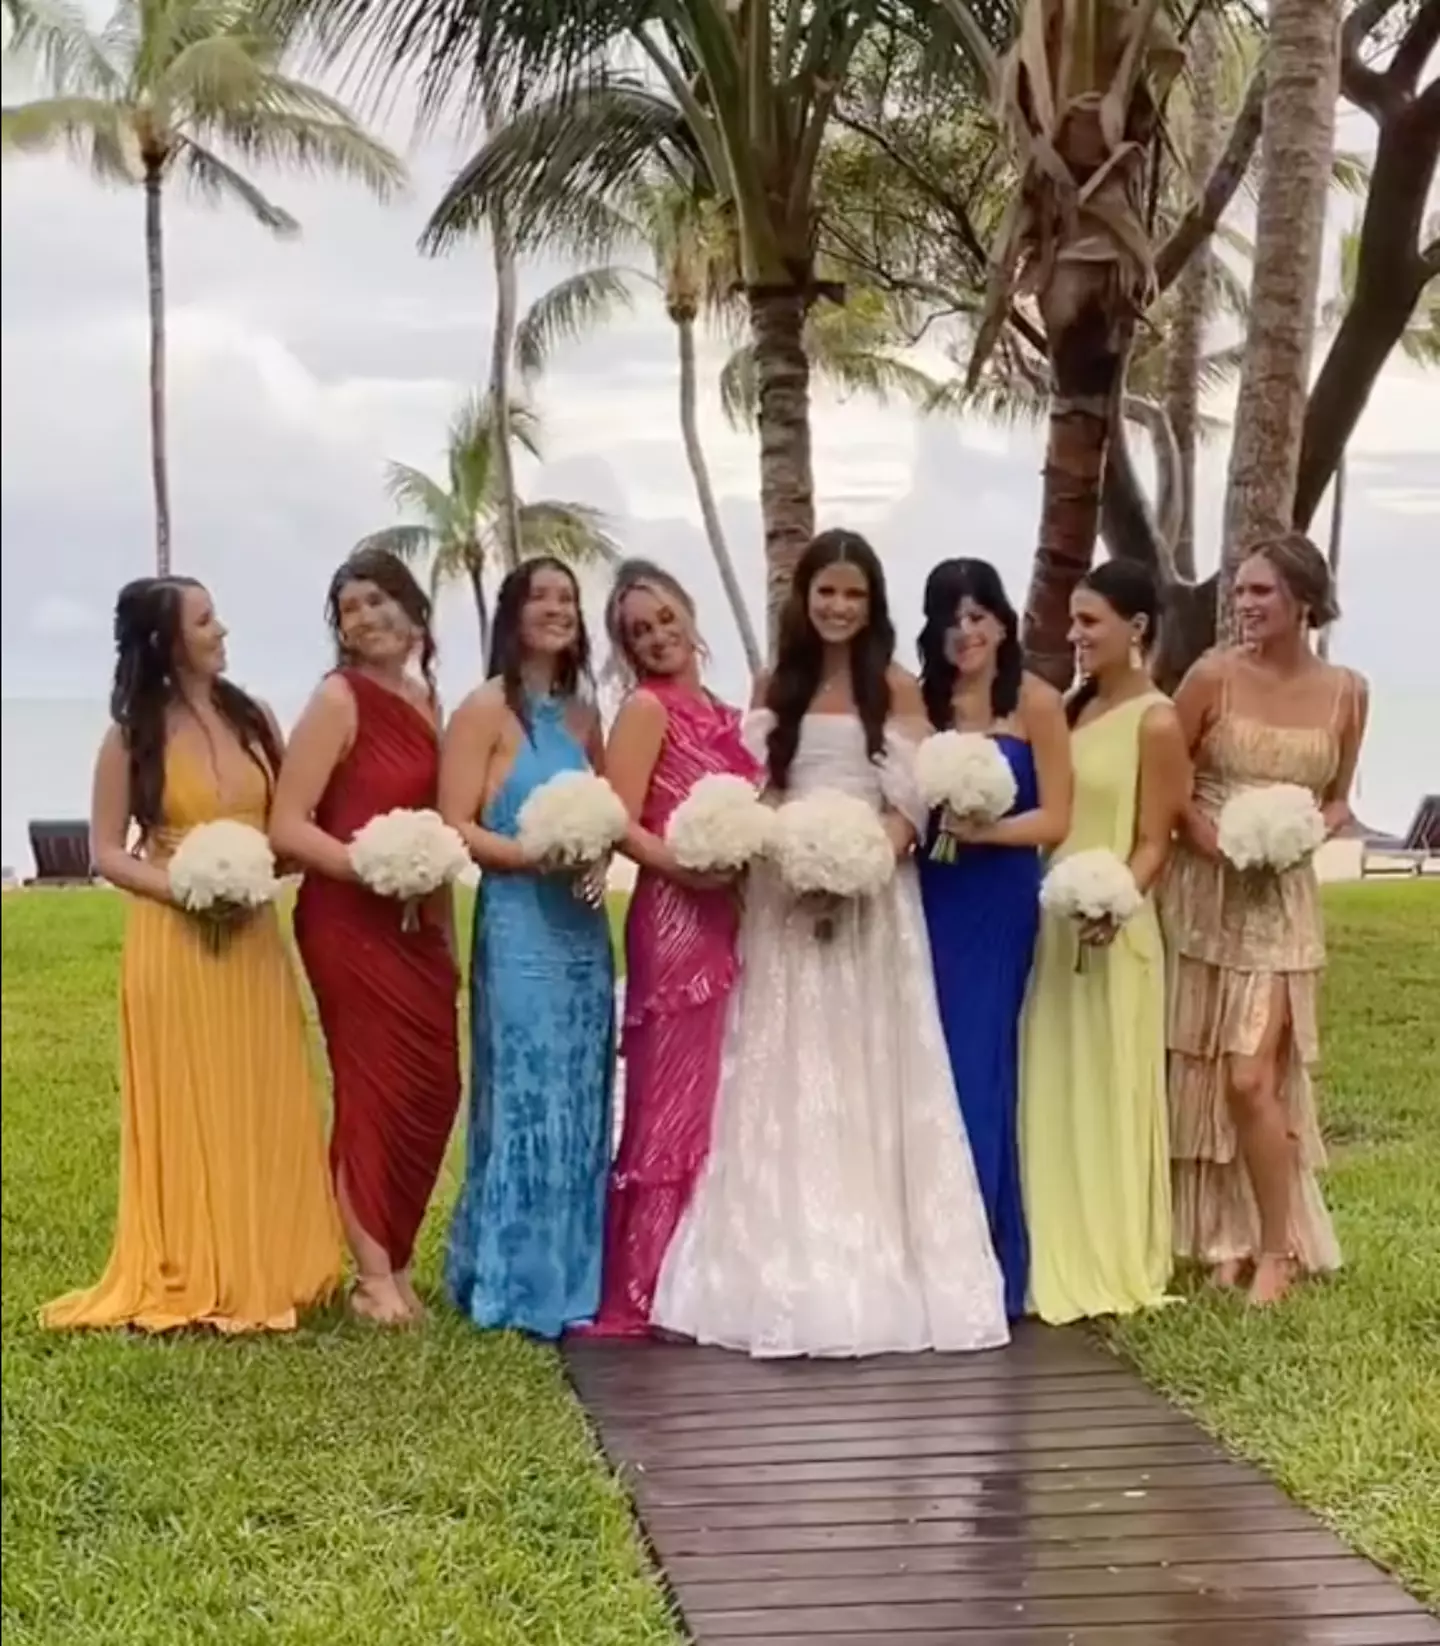 The bridesmaids all wore different dresses.